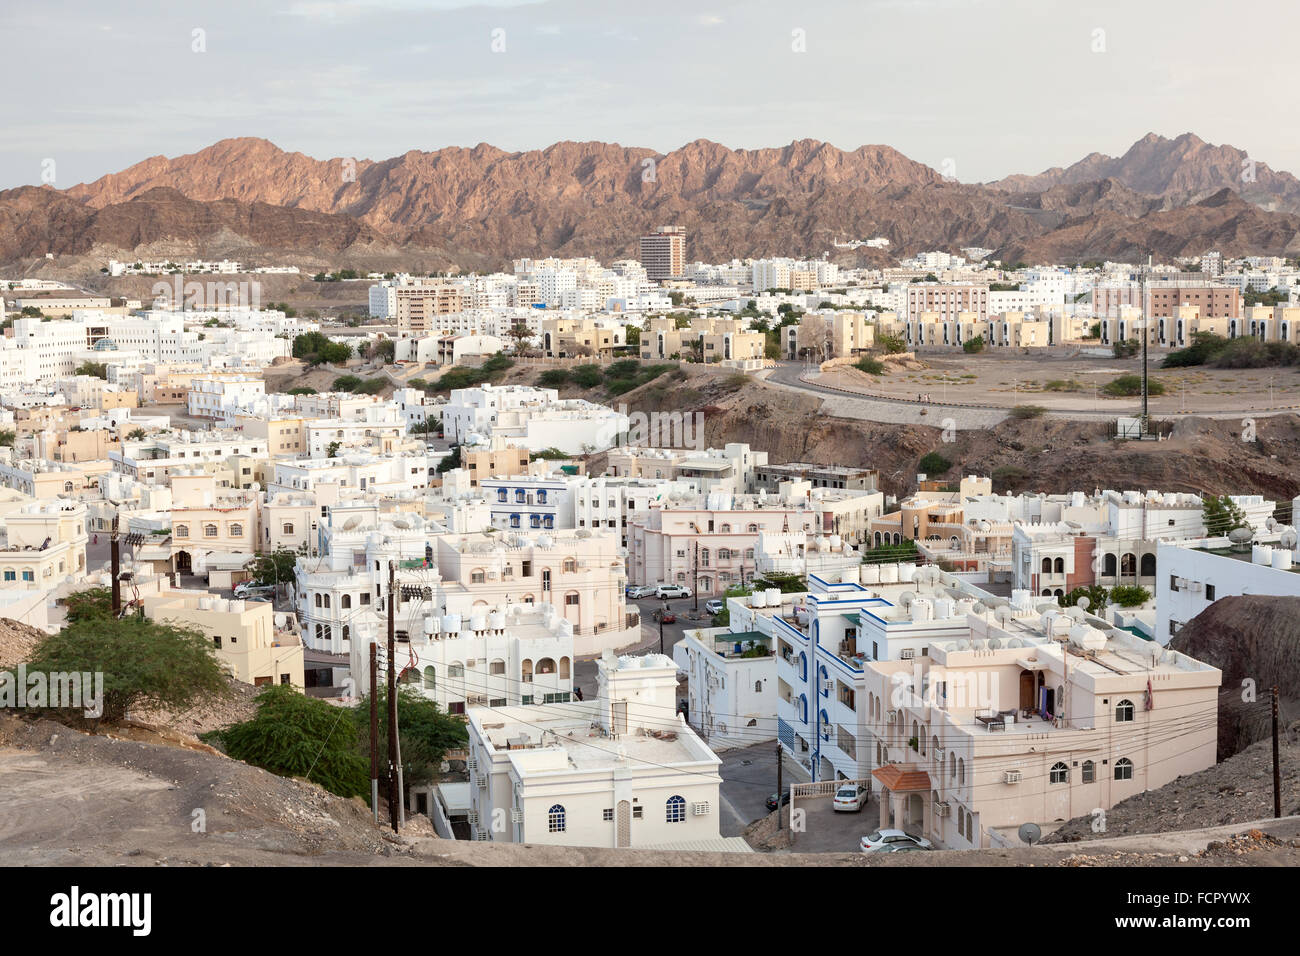 residential-buildings-in-the-city-of-muscat-sultanate-of-oman-middle-FCPYWX.jpeg